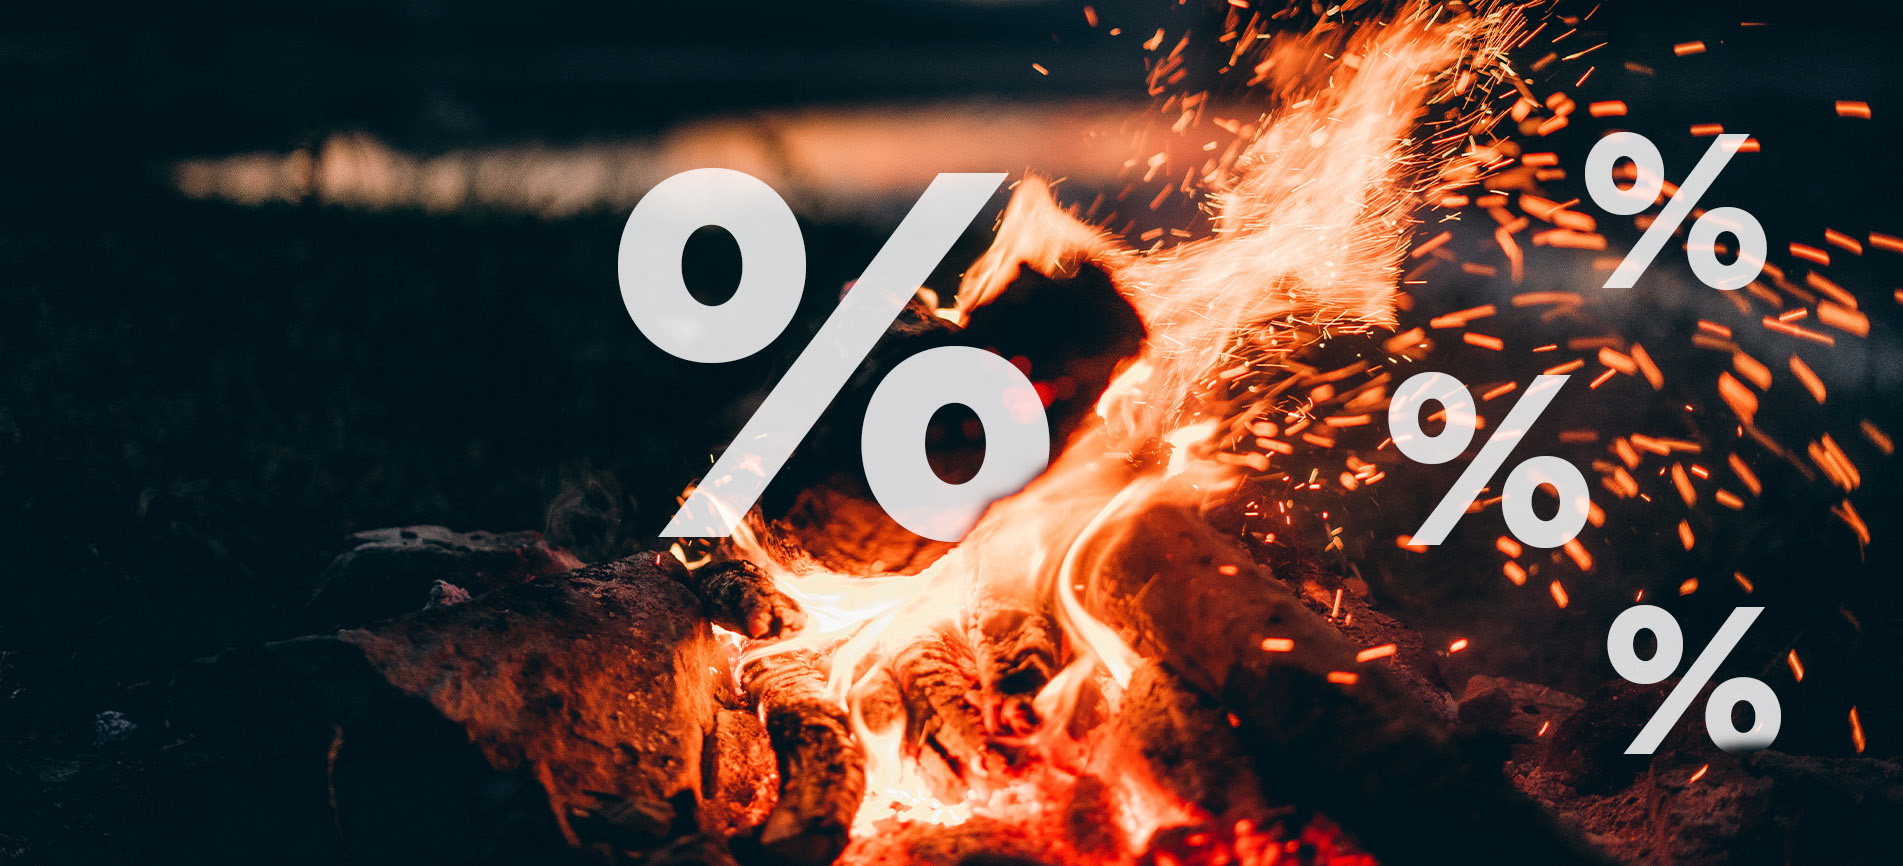 White percent (%) symbols overlaid on top of a background of fire, flames, and briquettes.